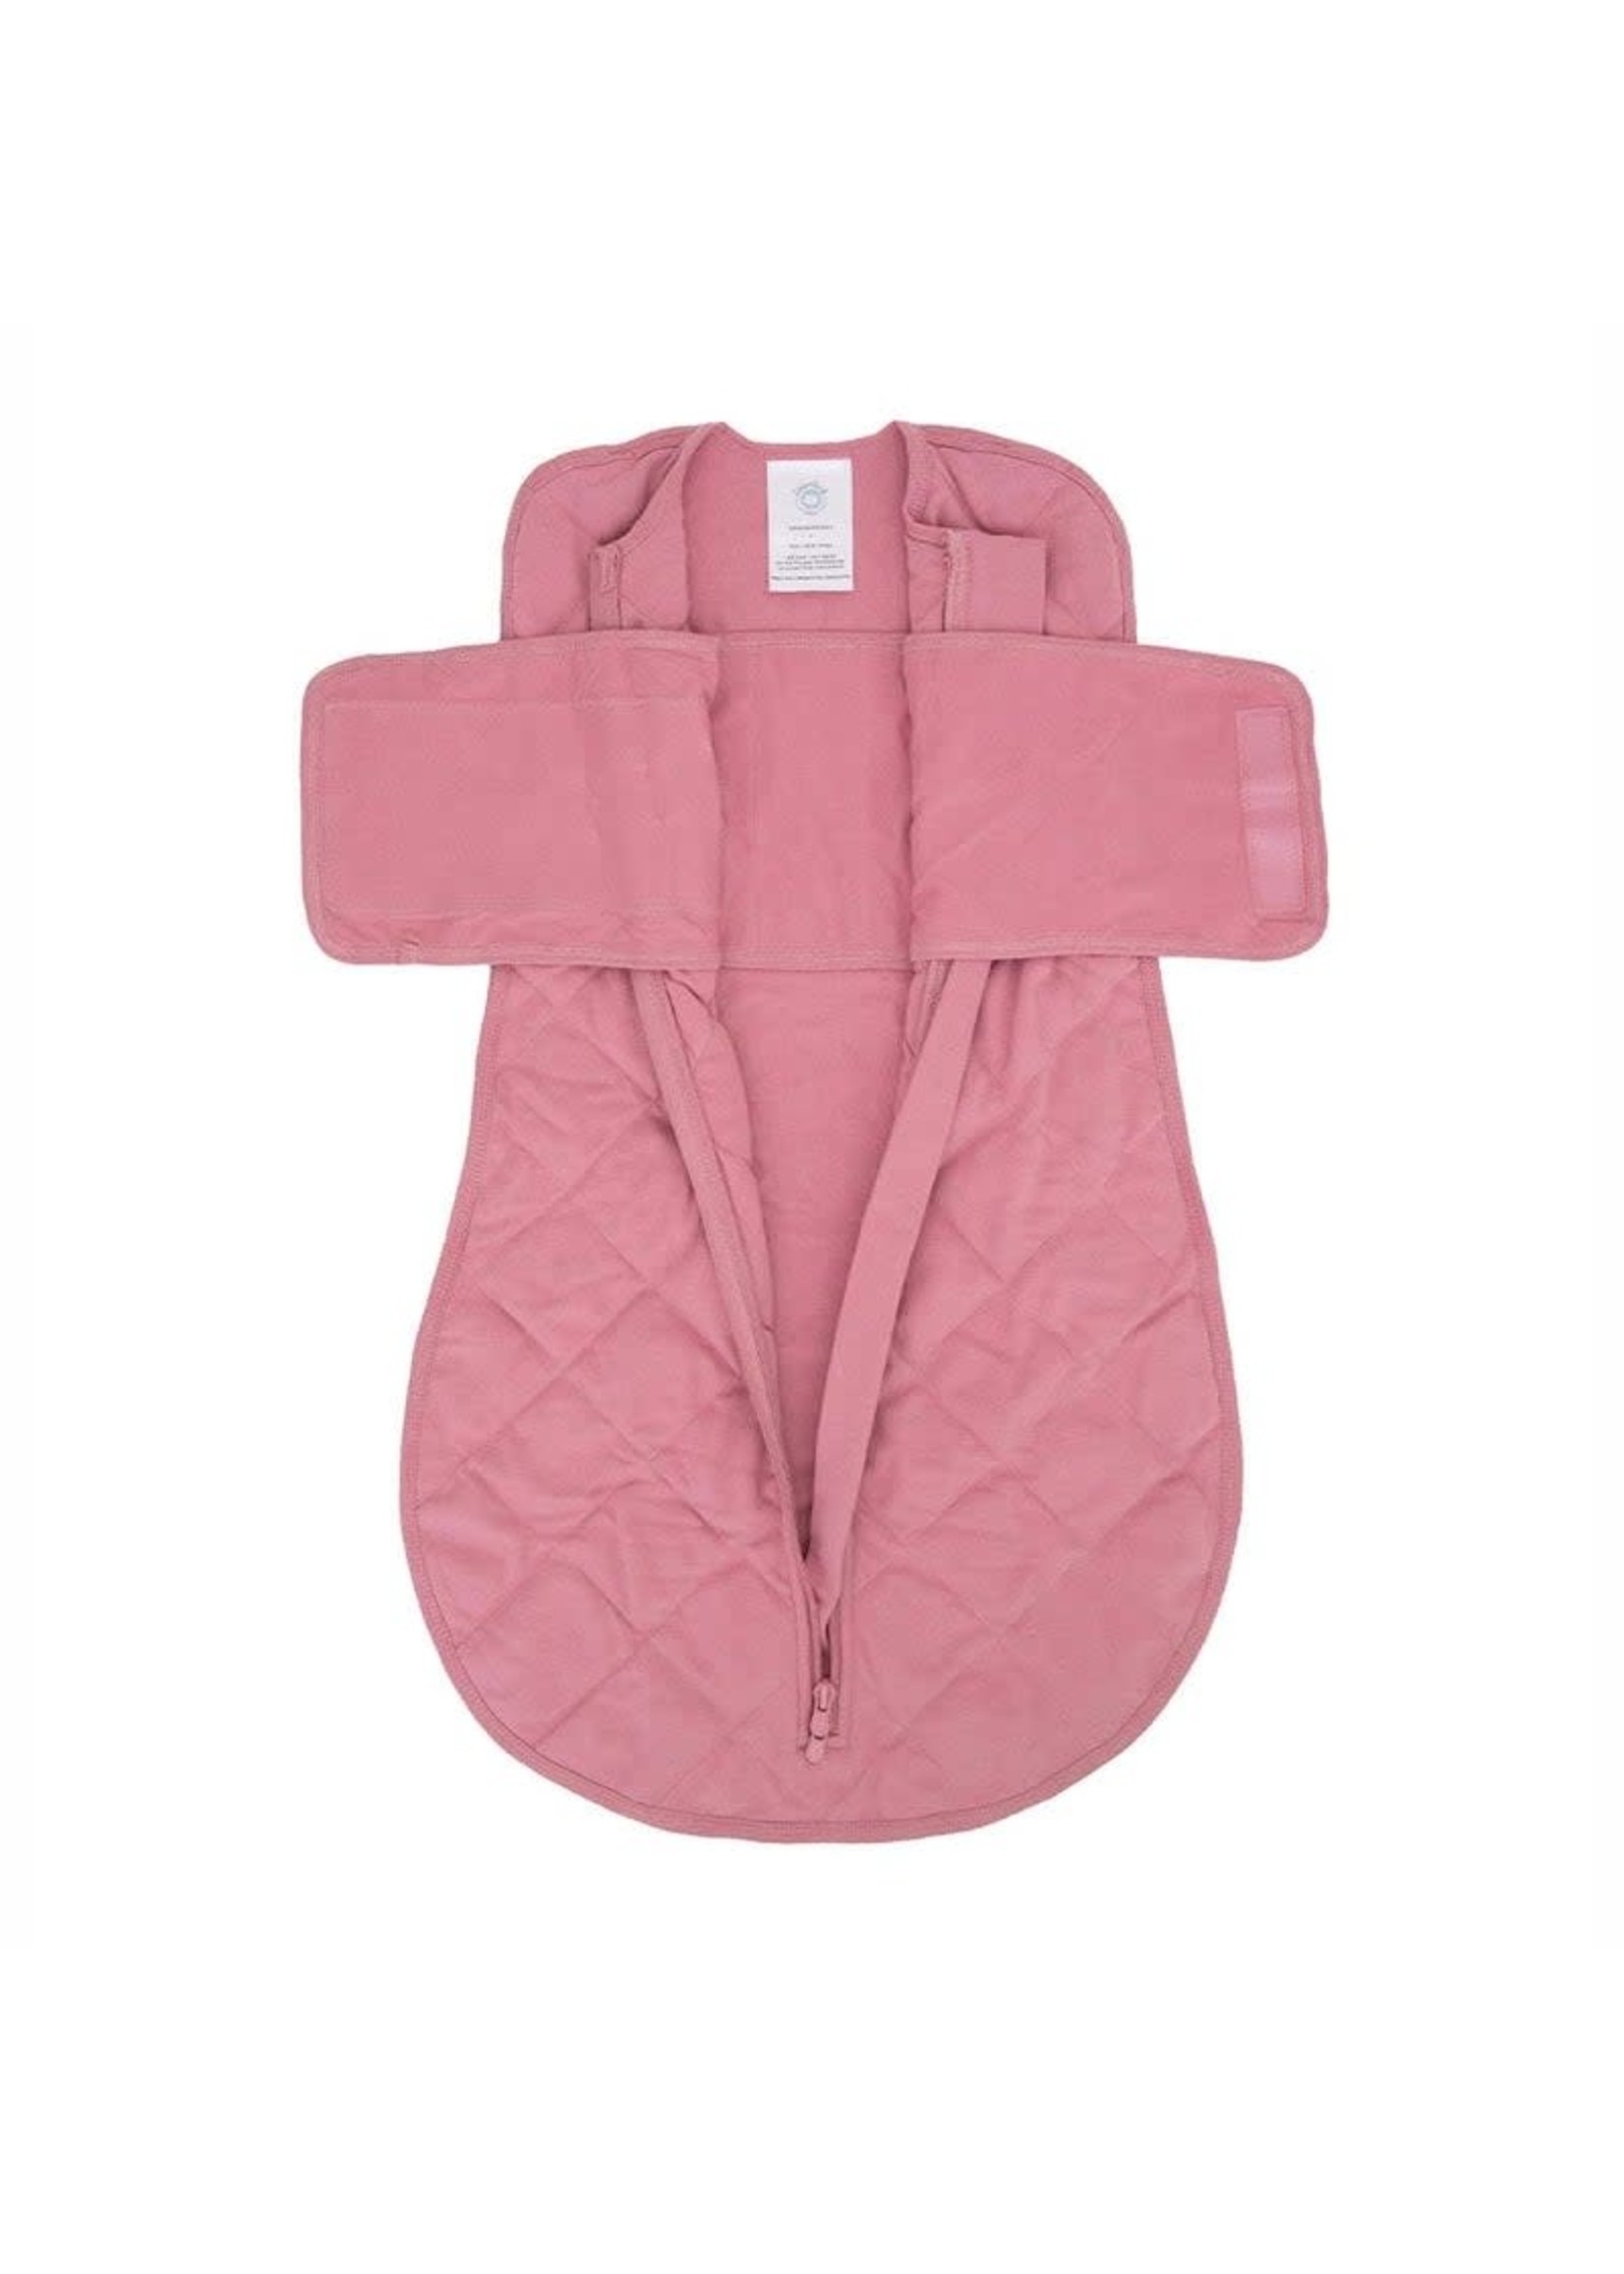 Dreamland Baby Dream Weighted Swaddle 2nd Generation | Dusty Rose Pink 0-6 mo  (in store)